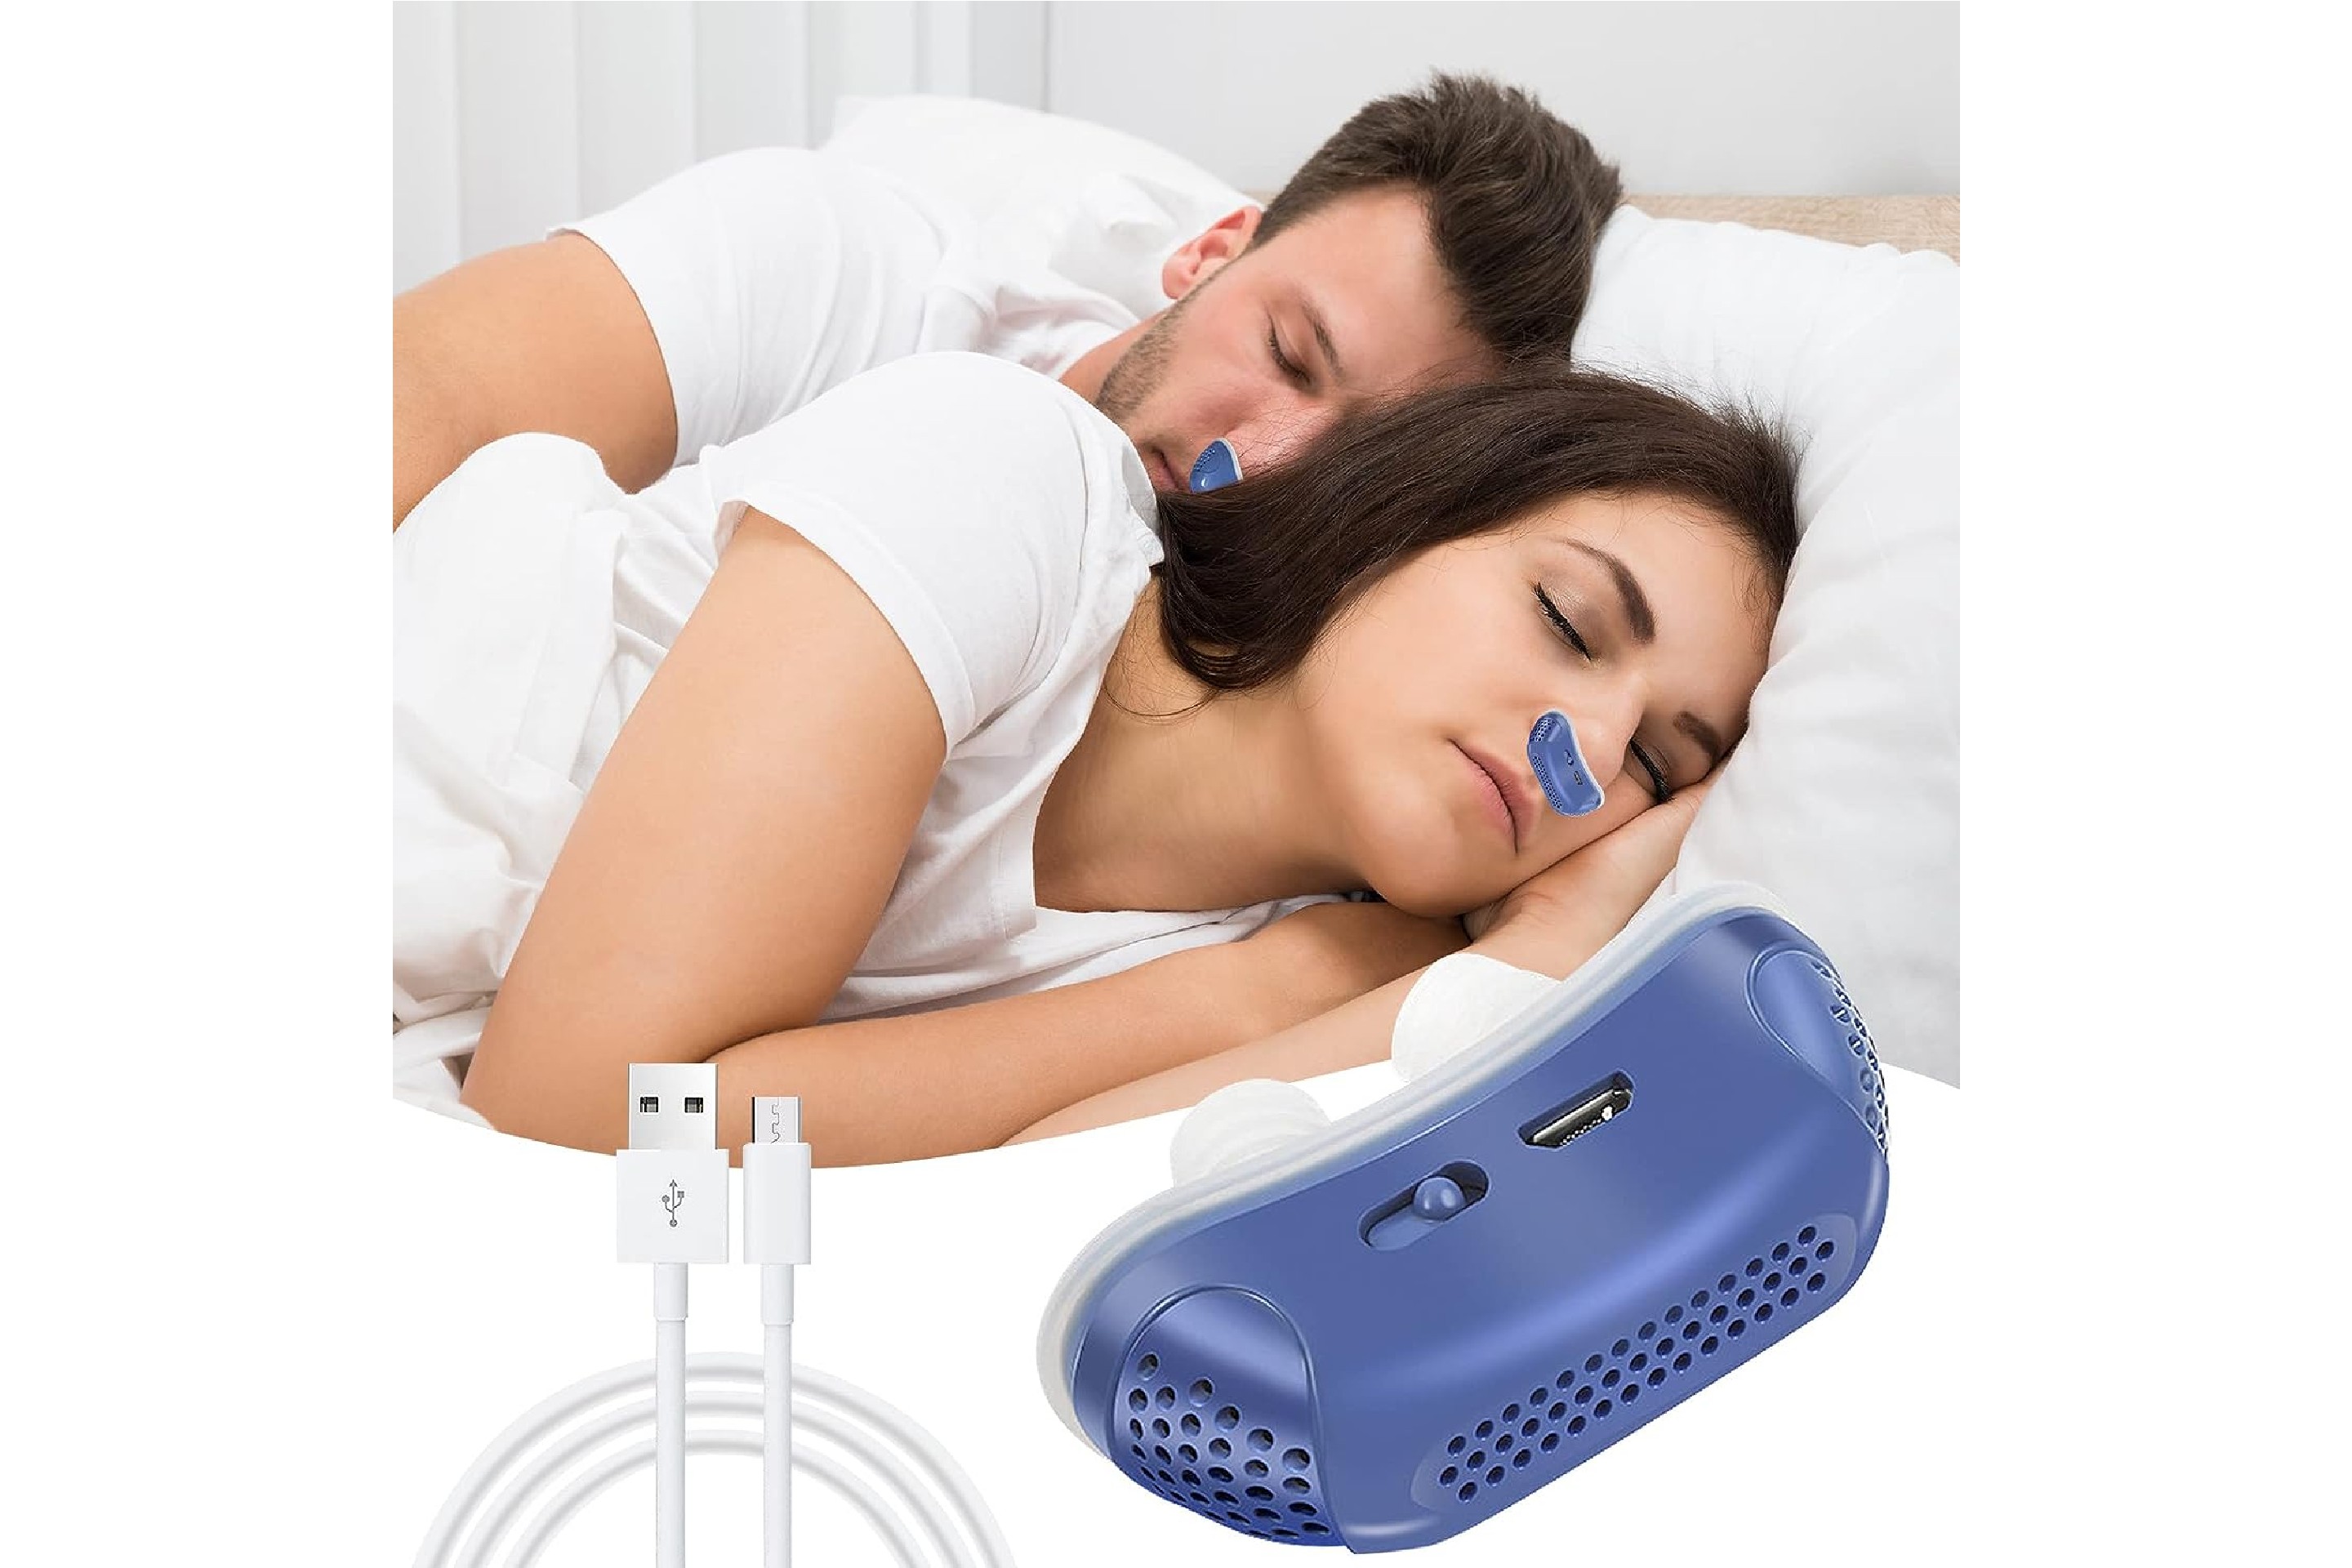 TUHIMO Electric Snore-Stopping Device